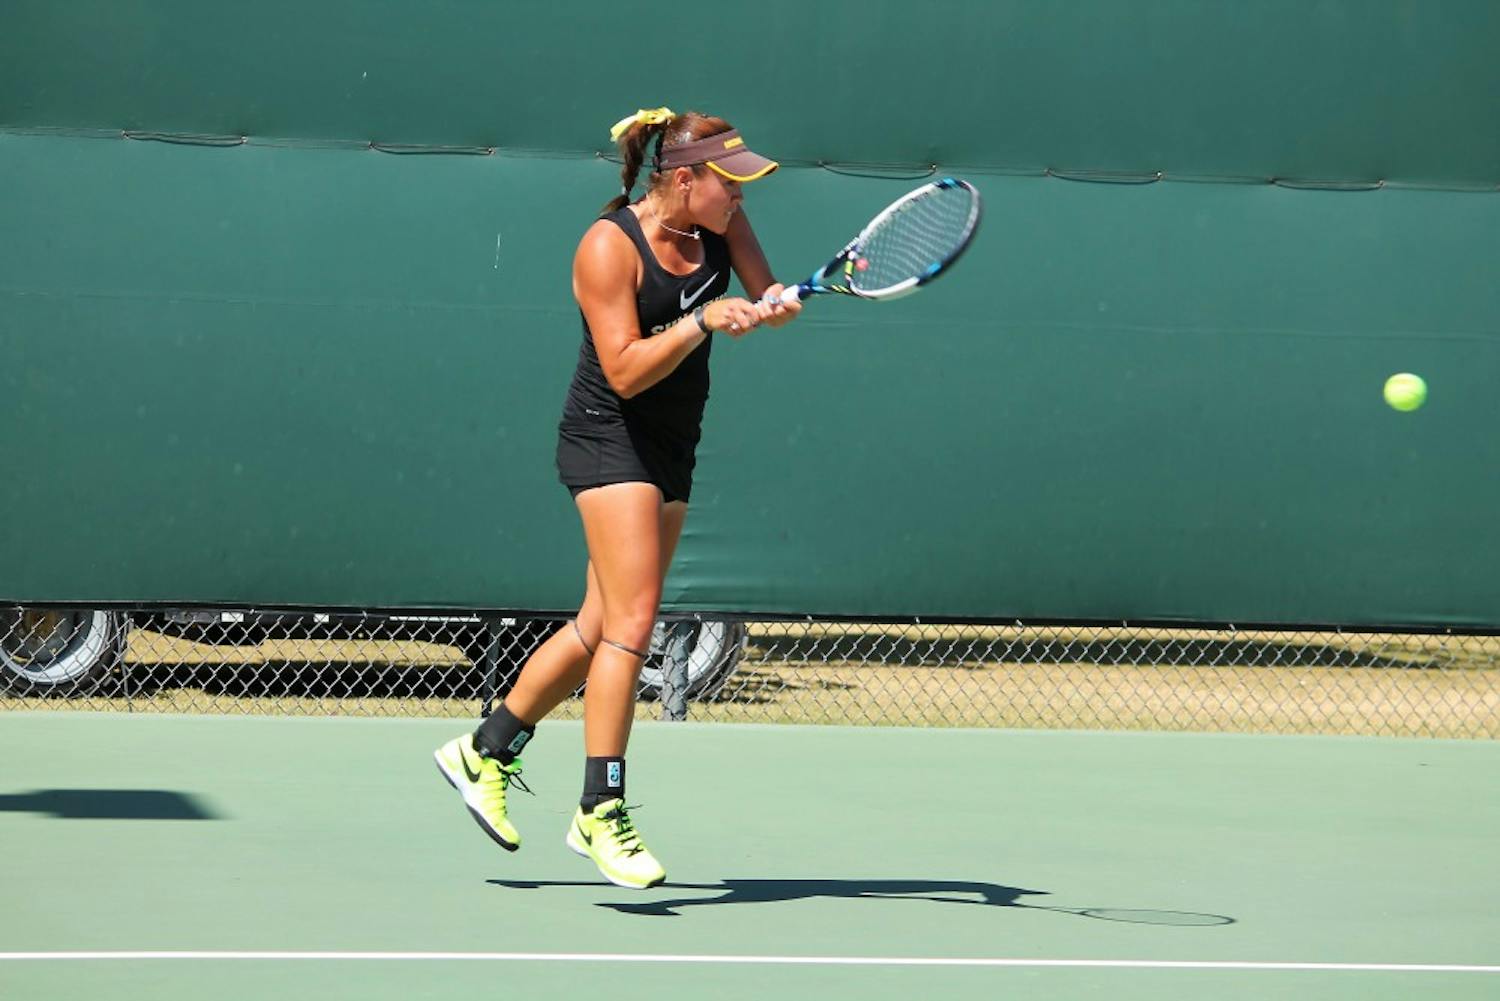 ASU Sophomore Kassidy Jump returns with a backhand during 6-4 6-